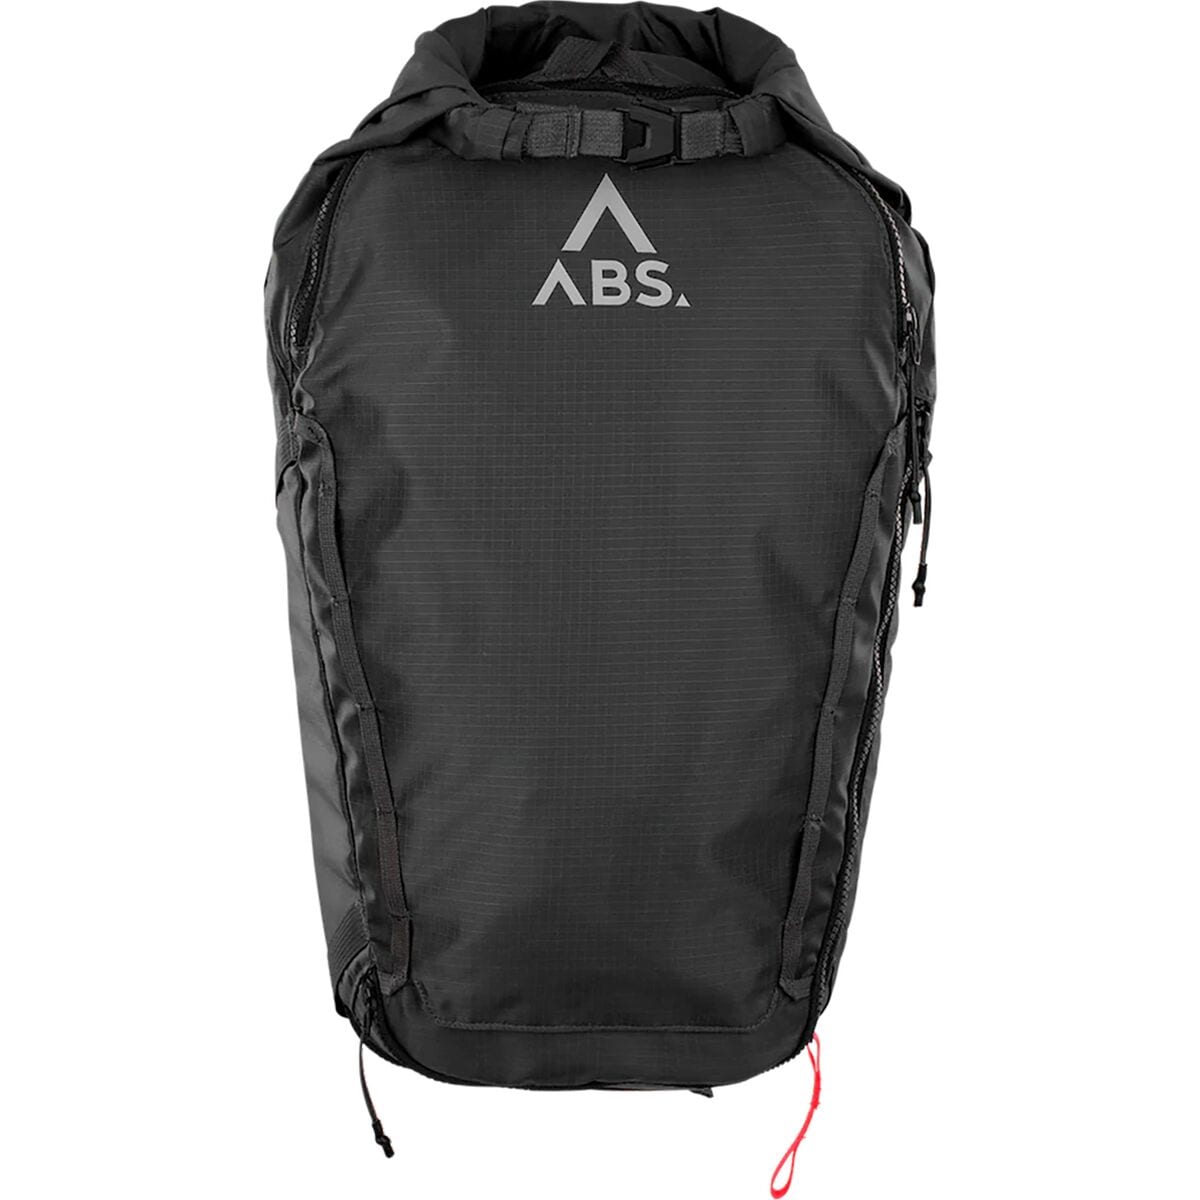 ABS Avalanche Rescue Devices A.Light Zipon 25-30L